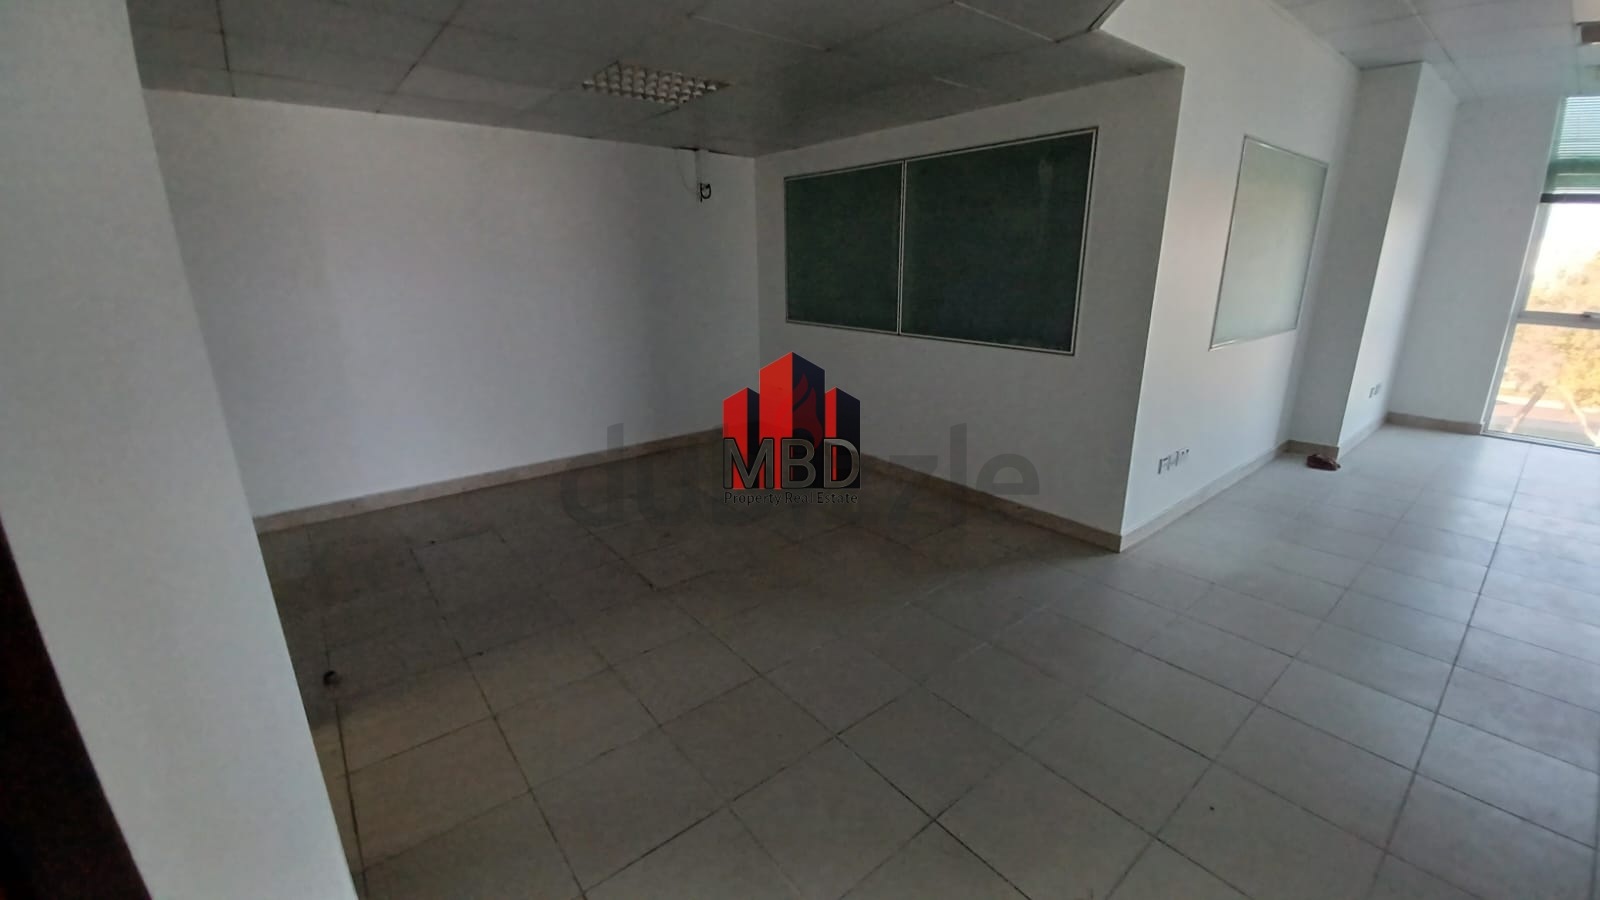 Amazing Office 159sqm Easy To Find Parking